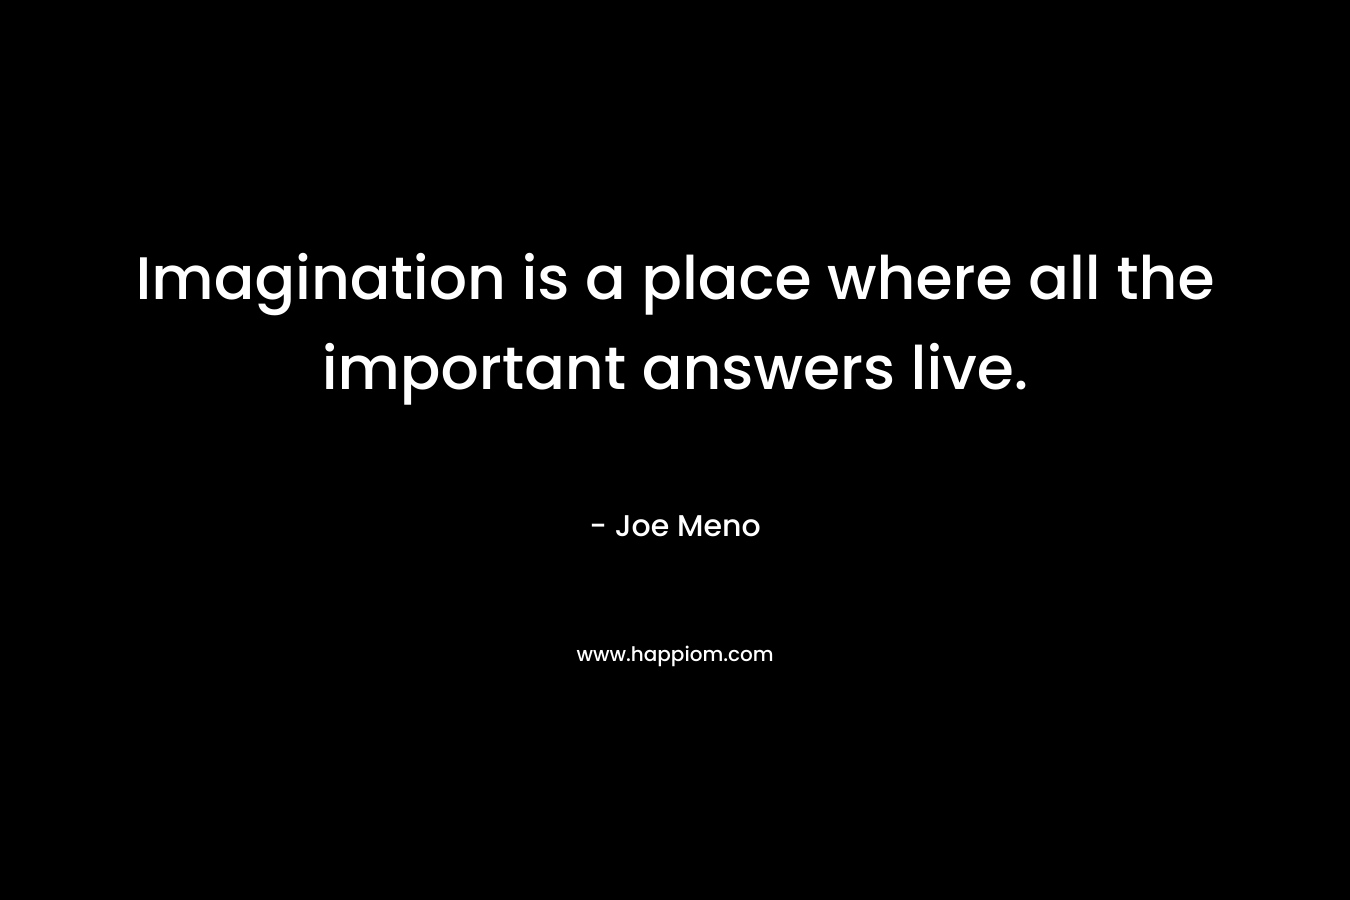 Imagination is a place where all the important answers live. – Joe Meno